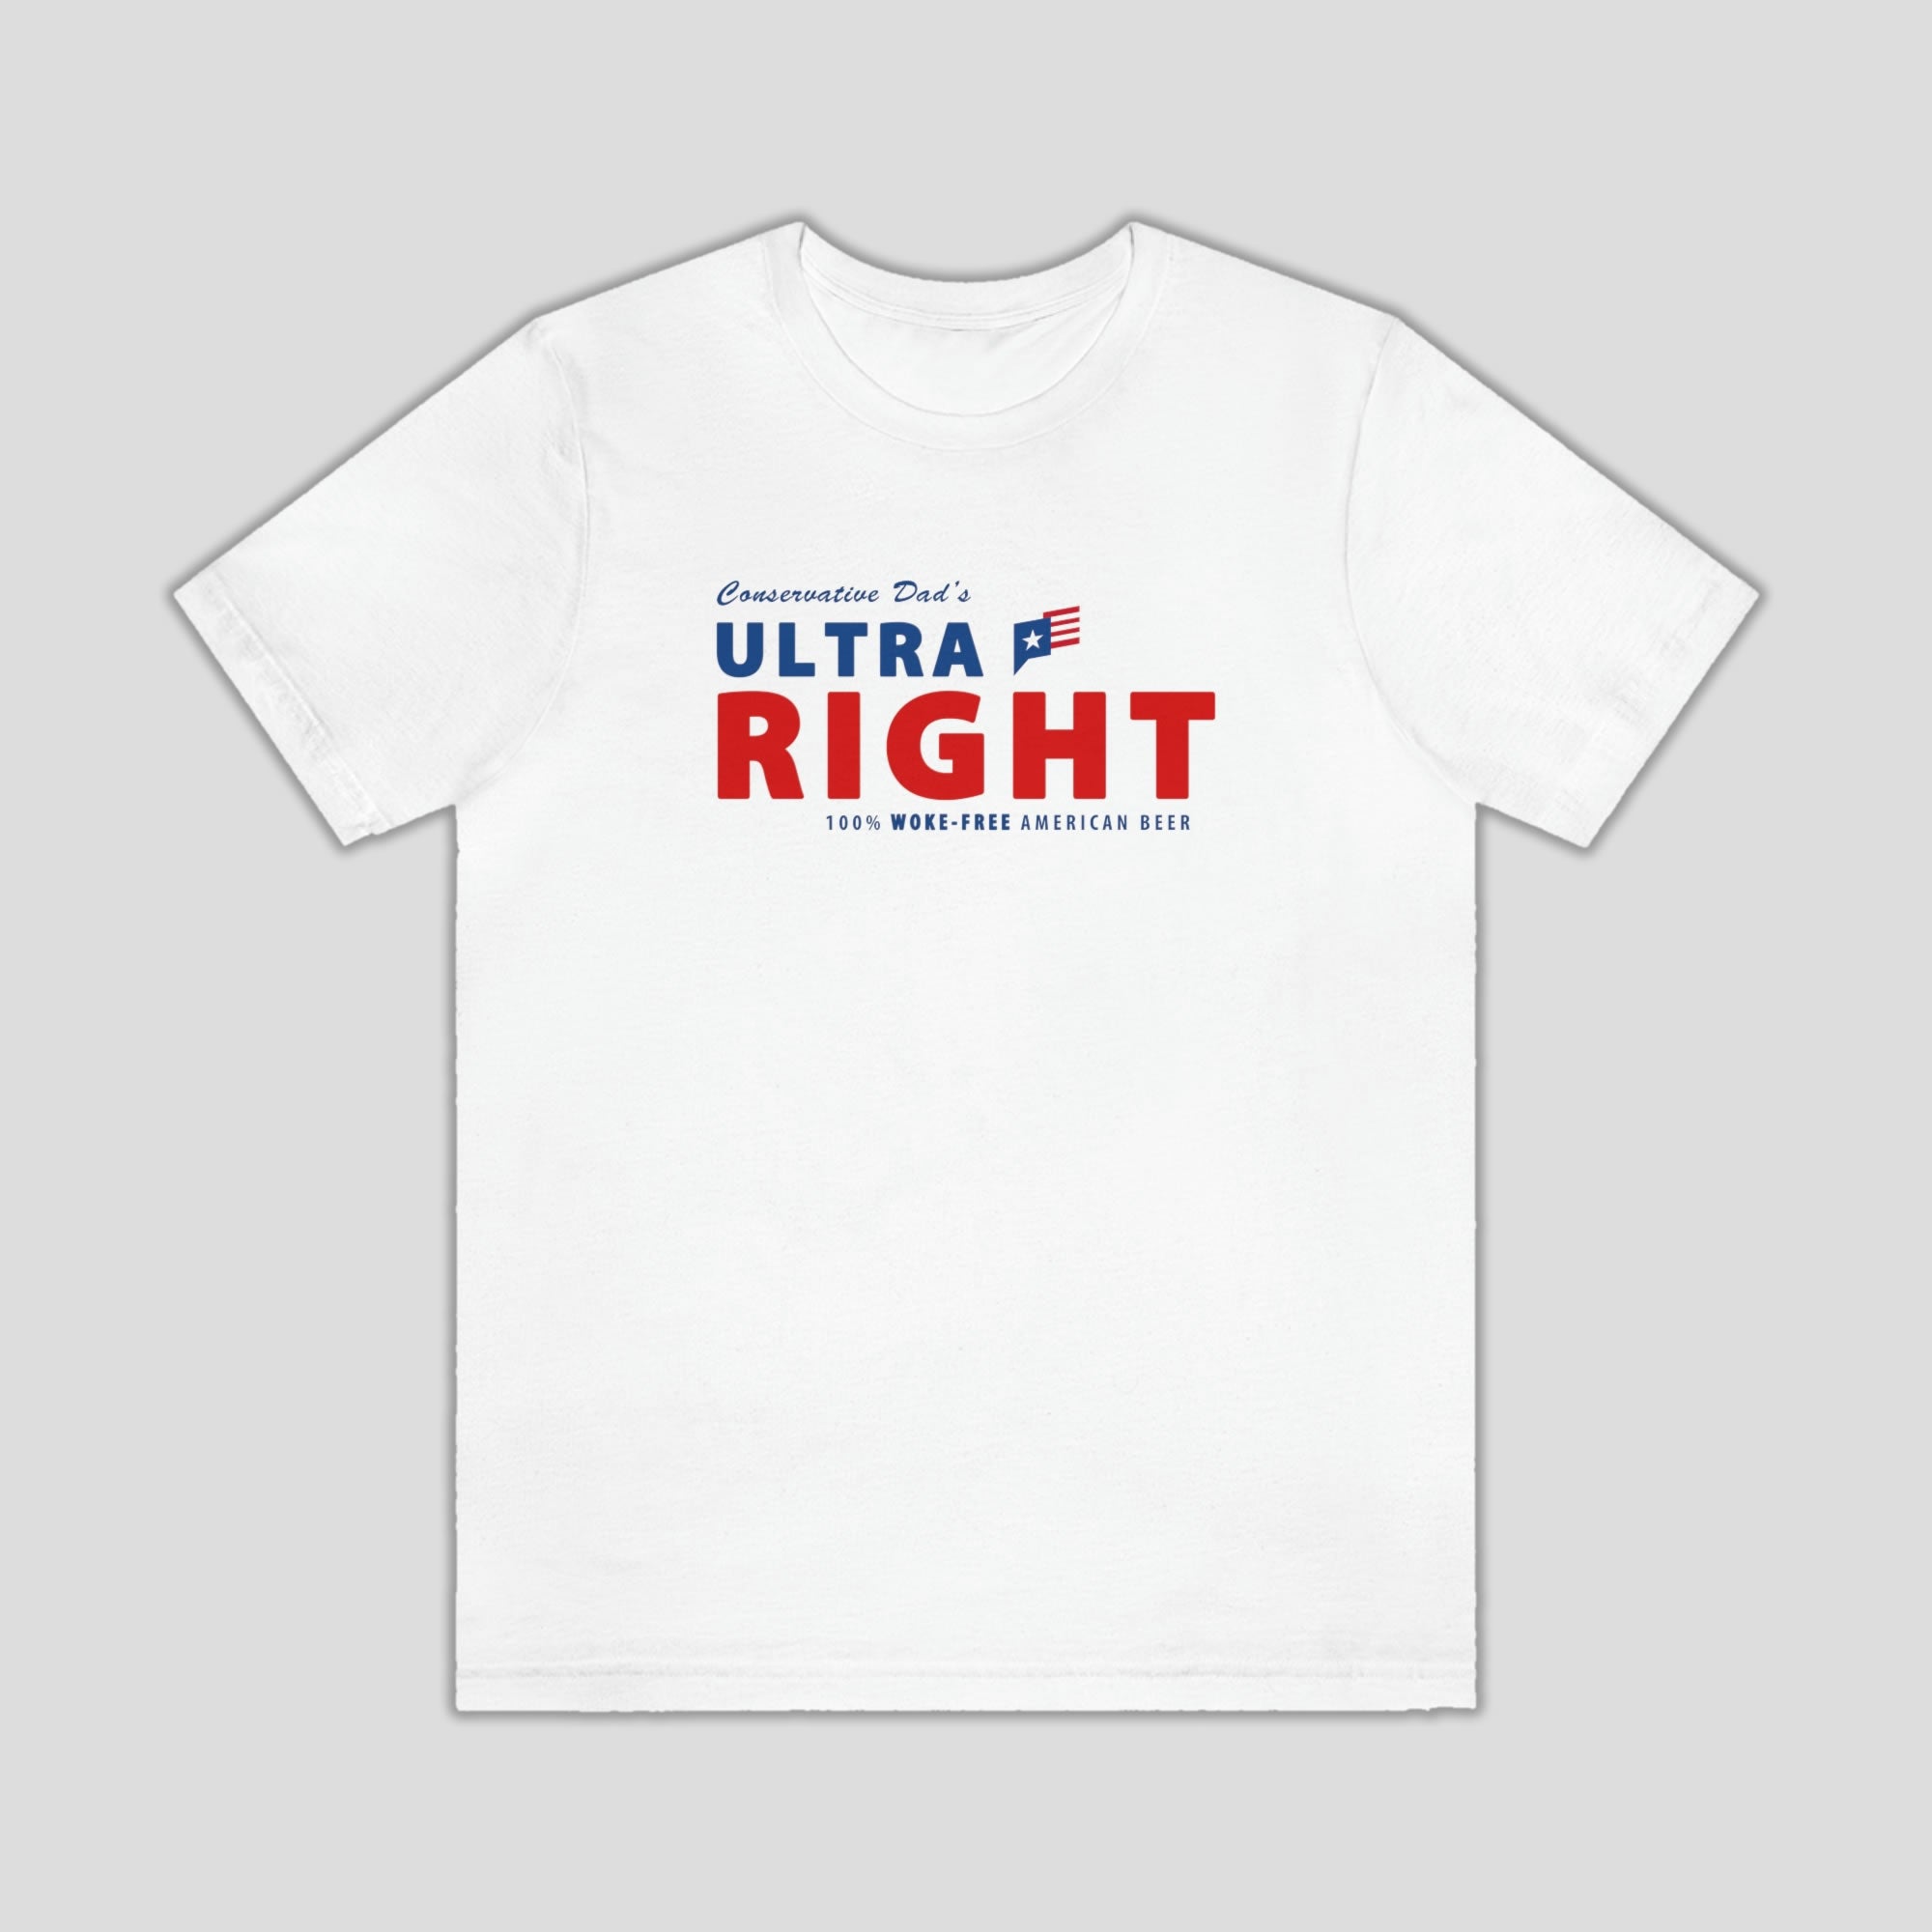 official-conservative-dad-s-ultra-right-beer-t-shirt-ultra-right-beer